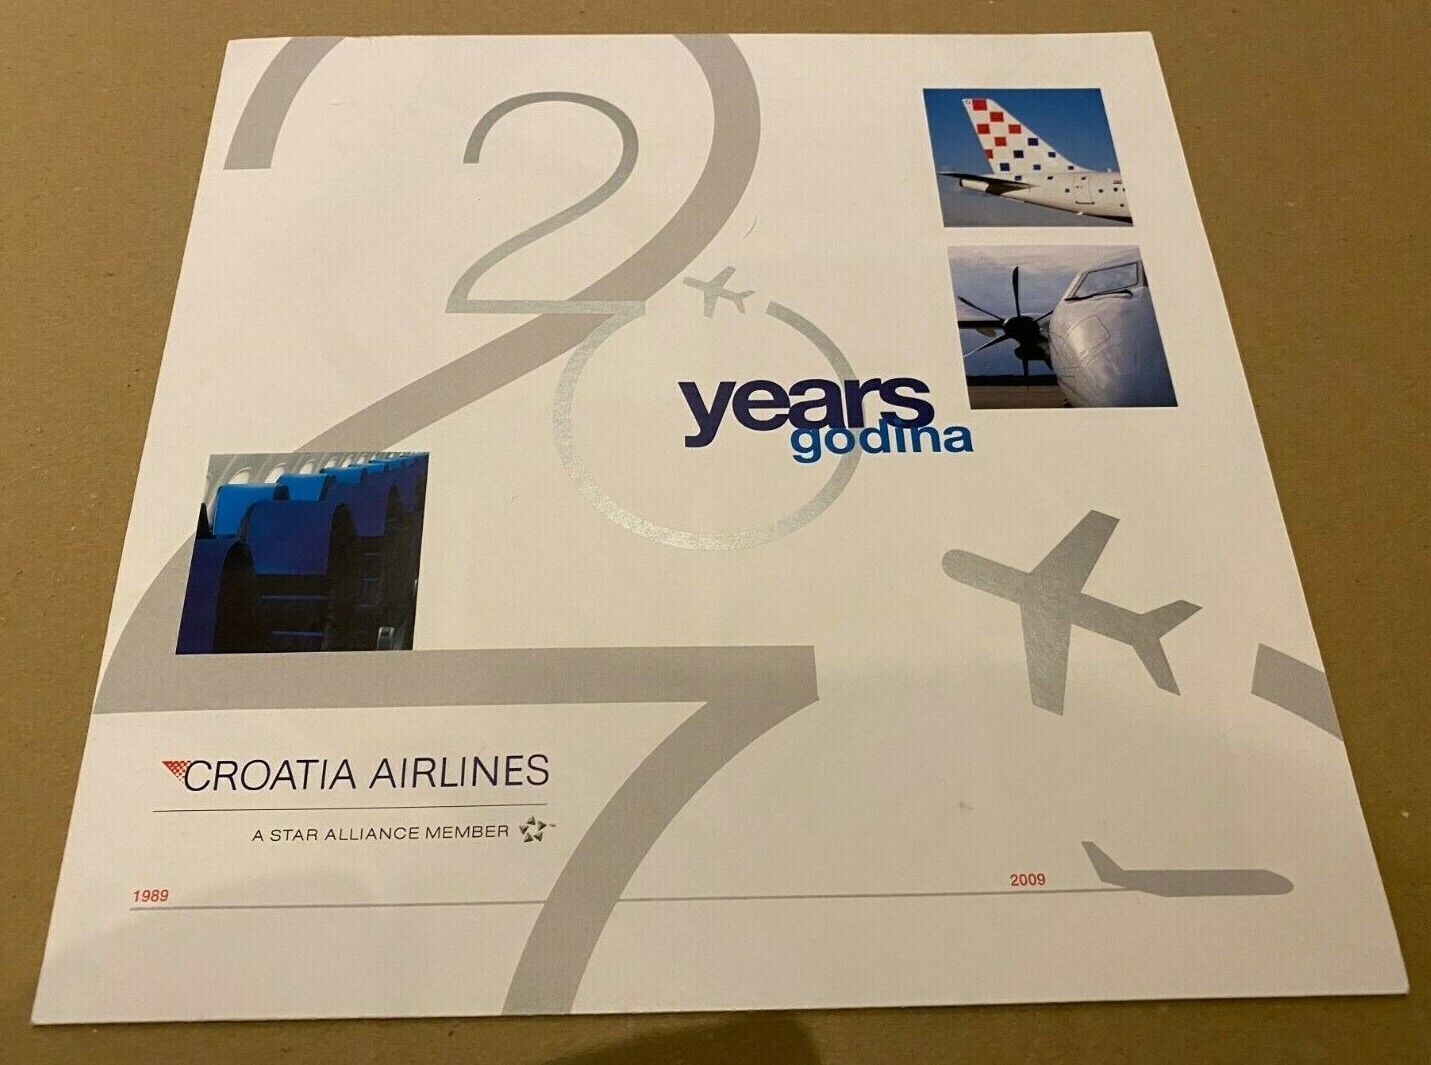 2009 CROATIA AIRLINES 20TH ANNIVERSARY BROCHURE - MD82,737-200 PICTURES - POSTER